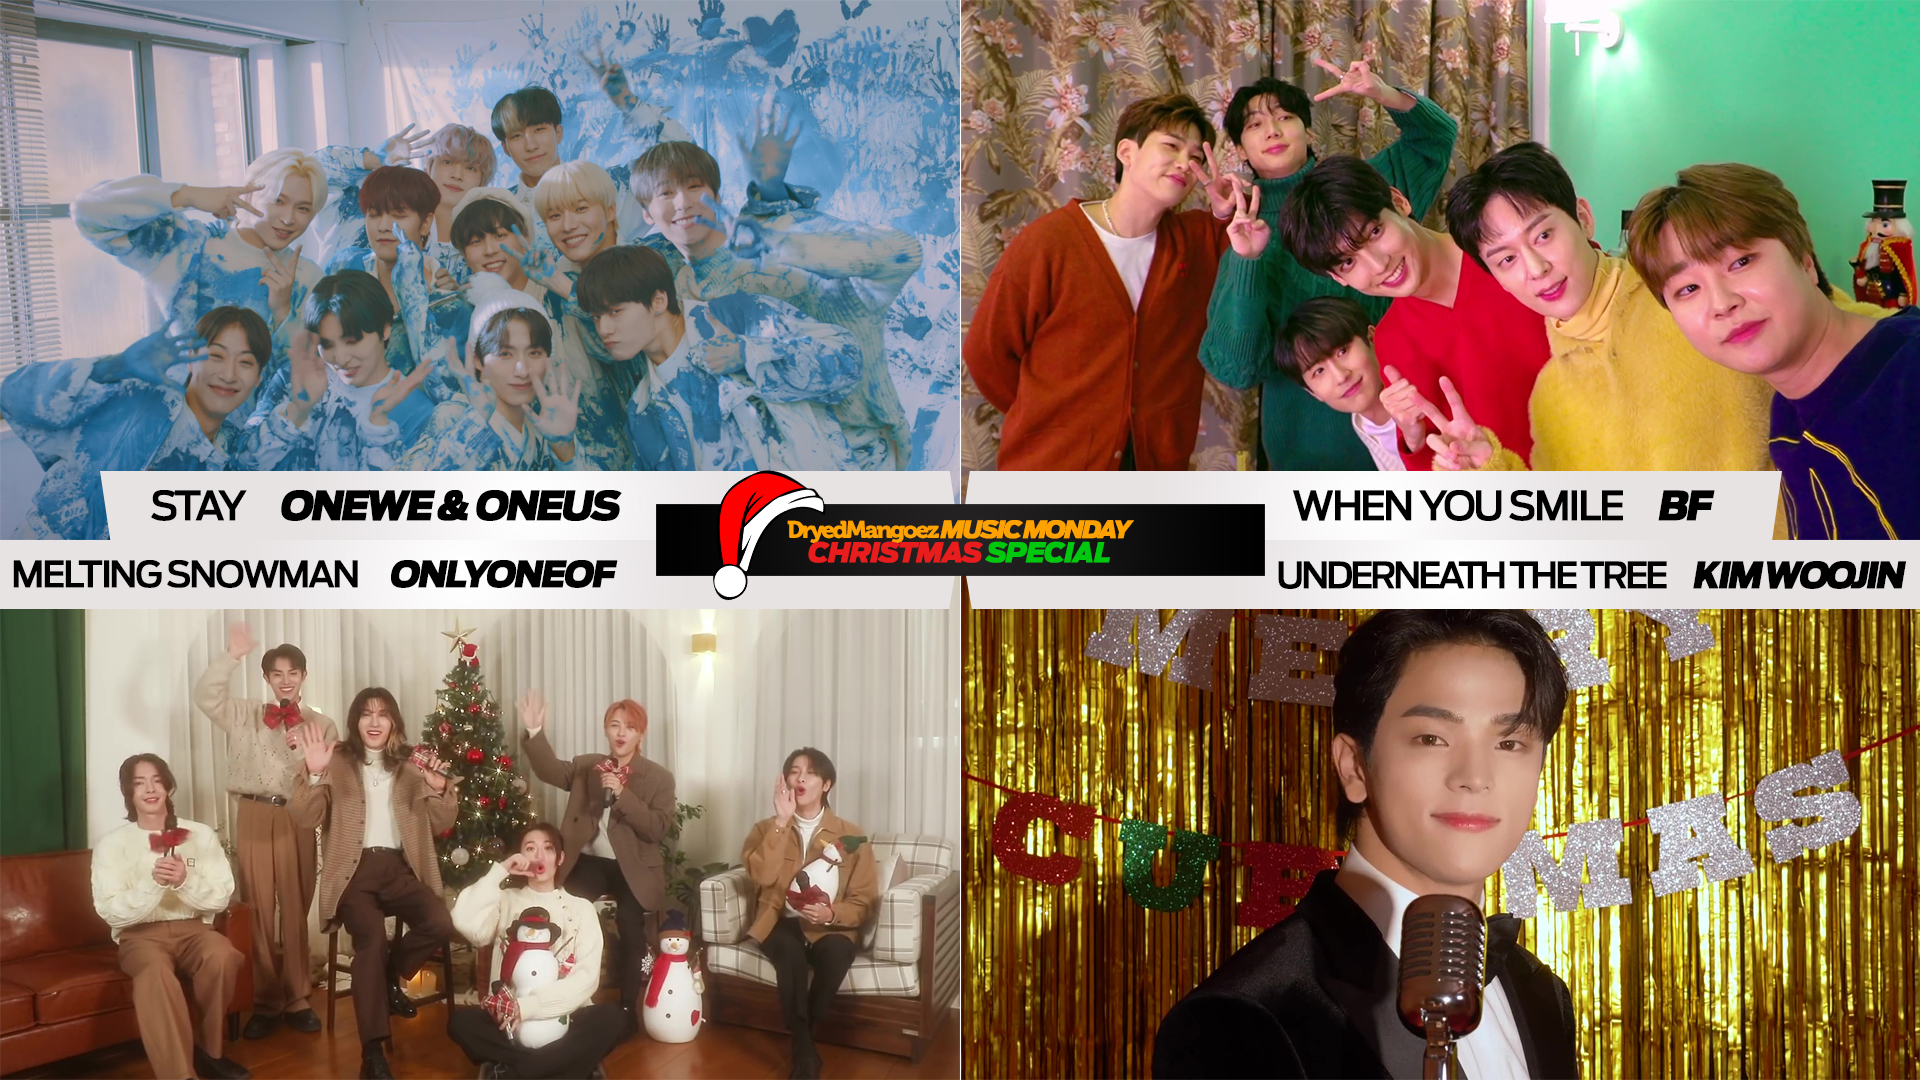 Music Monday Christmas Special – Four Christmas Treats from ONEWE & ONEUS, BF, OnlyOneOf, Kim Woojin